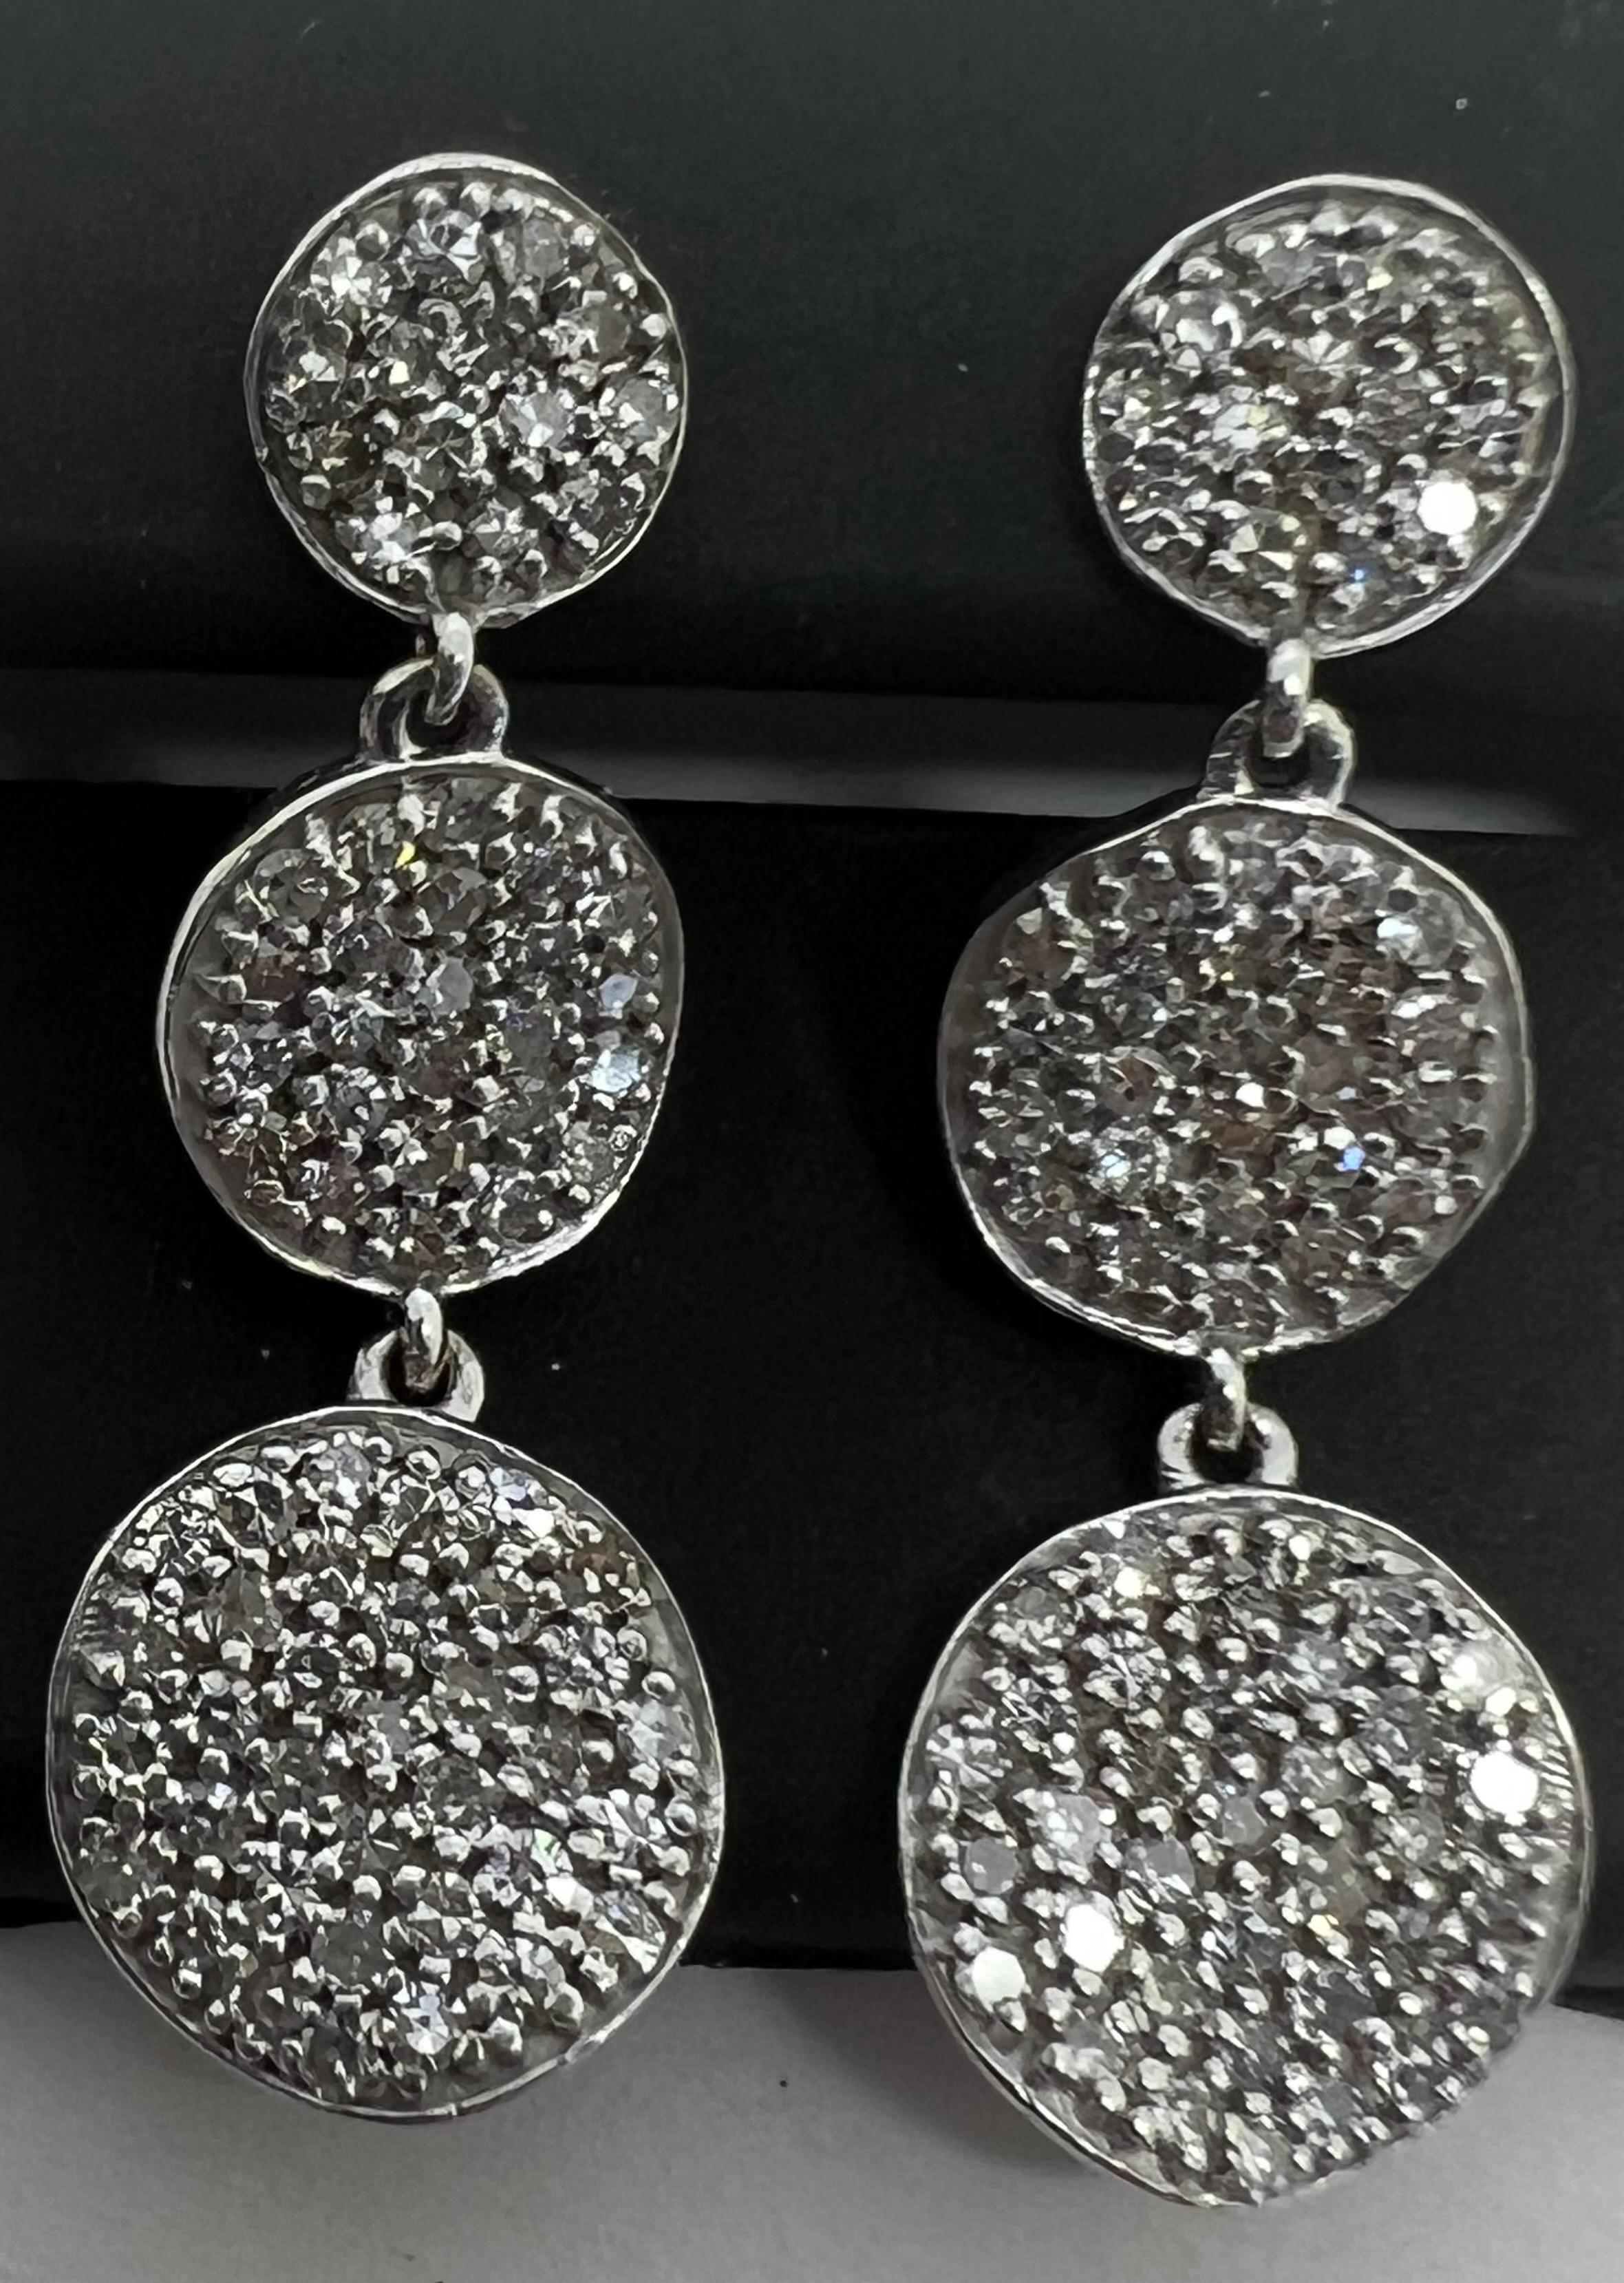 Elevate your style with these exquisite 14k White Gold Diamond Pave Drop Dangle Circle Earrings. The beautiful round shaped natural diamonds are set in a pavé setting style, which gives these earrings an elegant and sophisticated look. The total